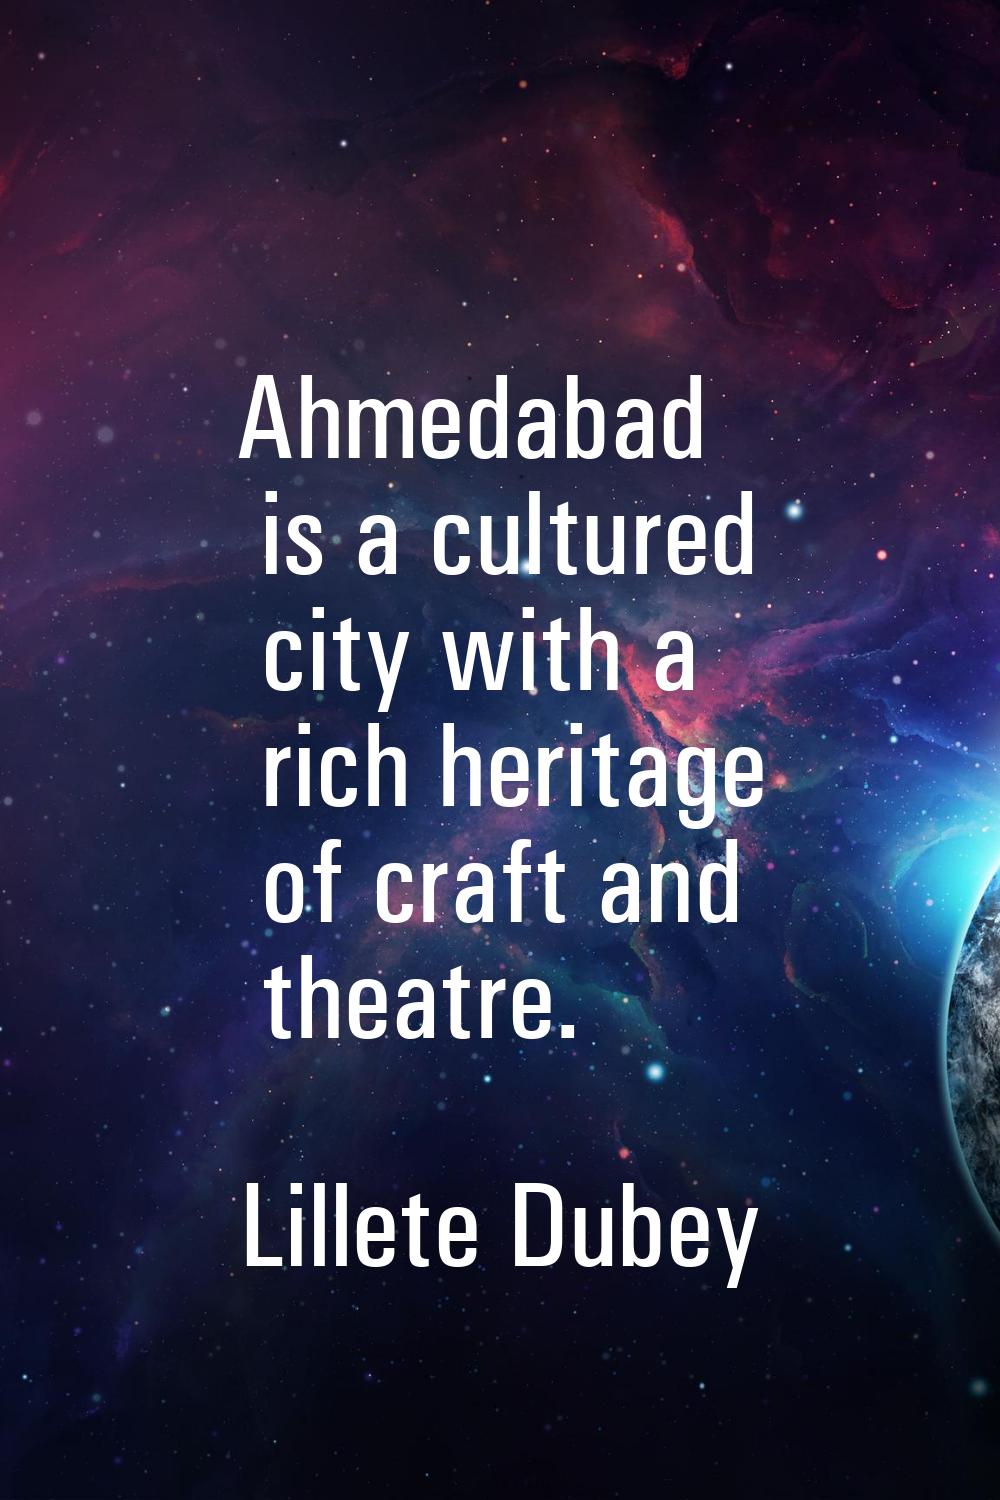 Ahmedabad is a cultured city with a rich heritage of craft and theatre.